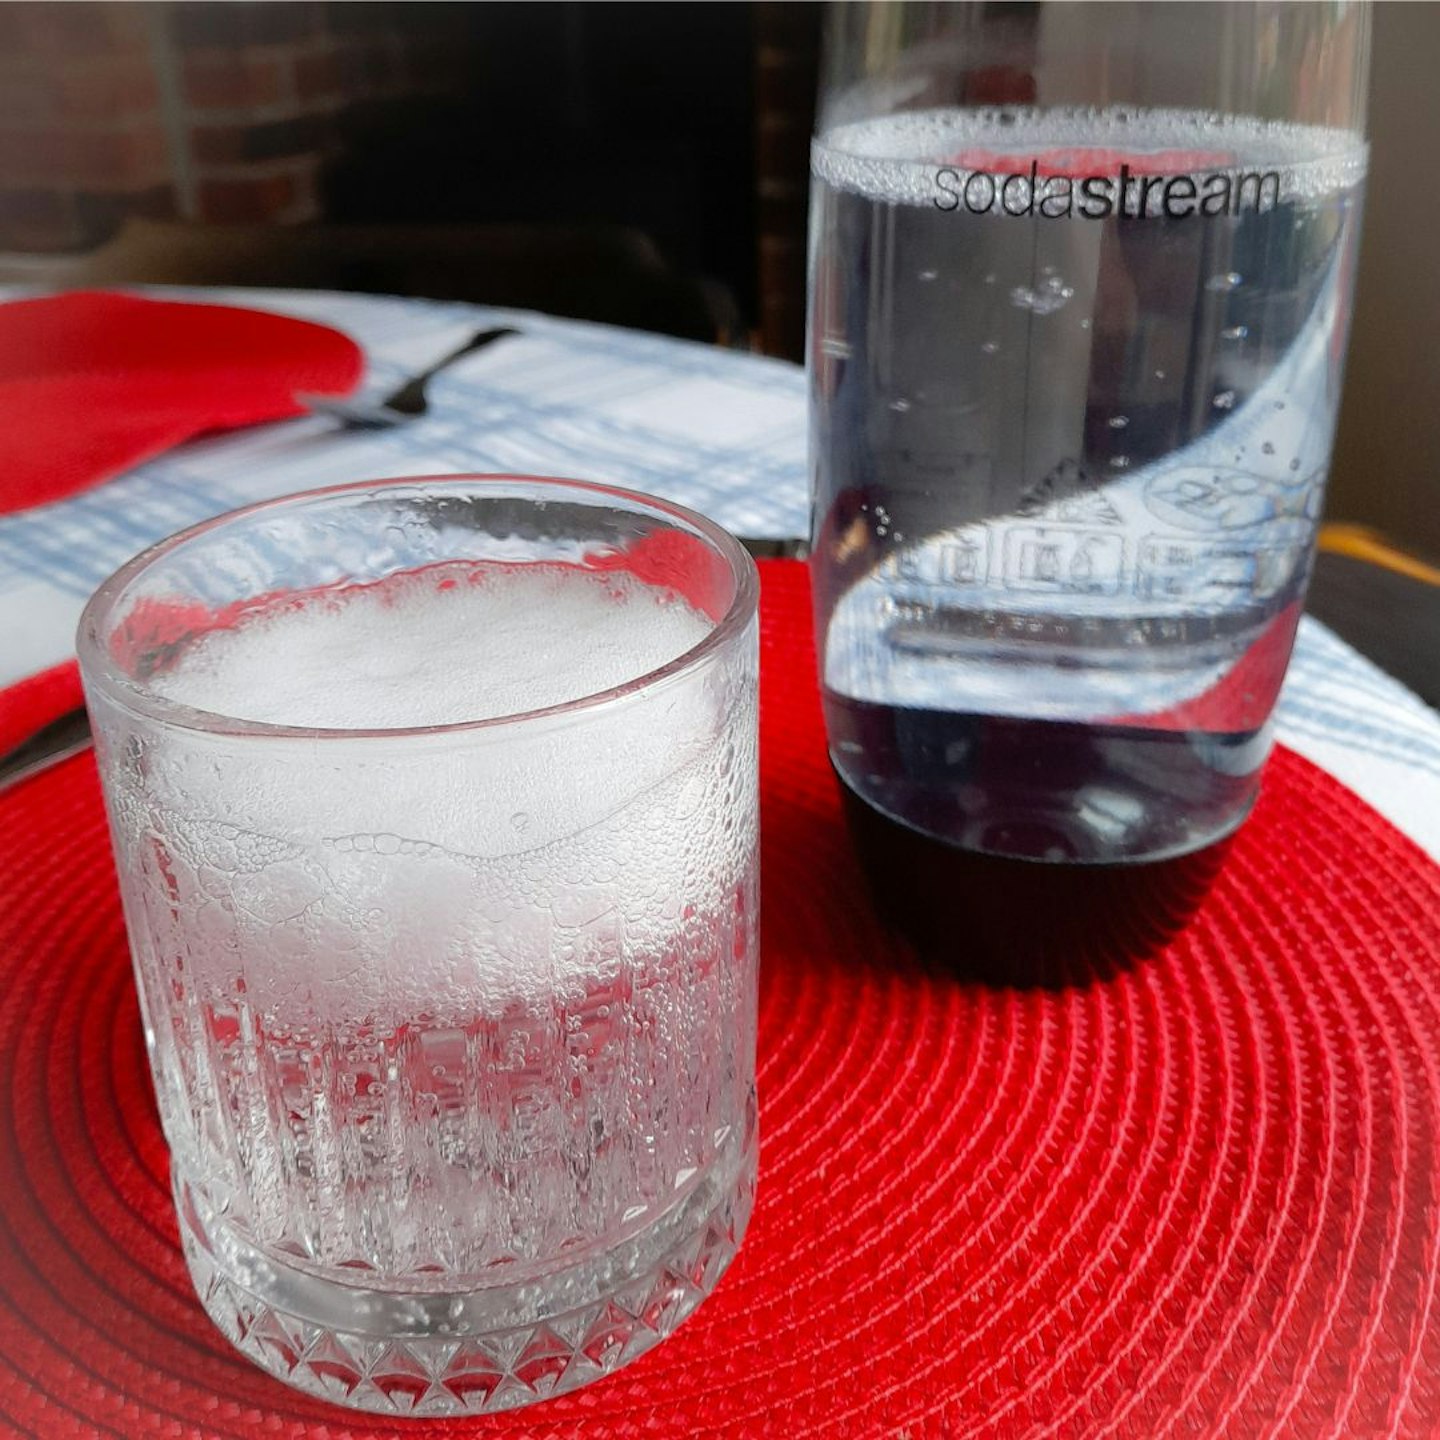 Sparkling water made in a Sodastream